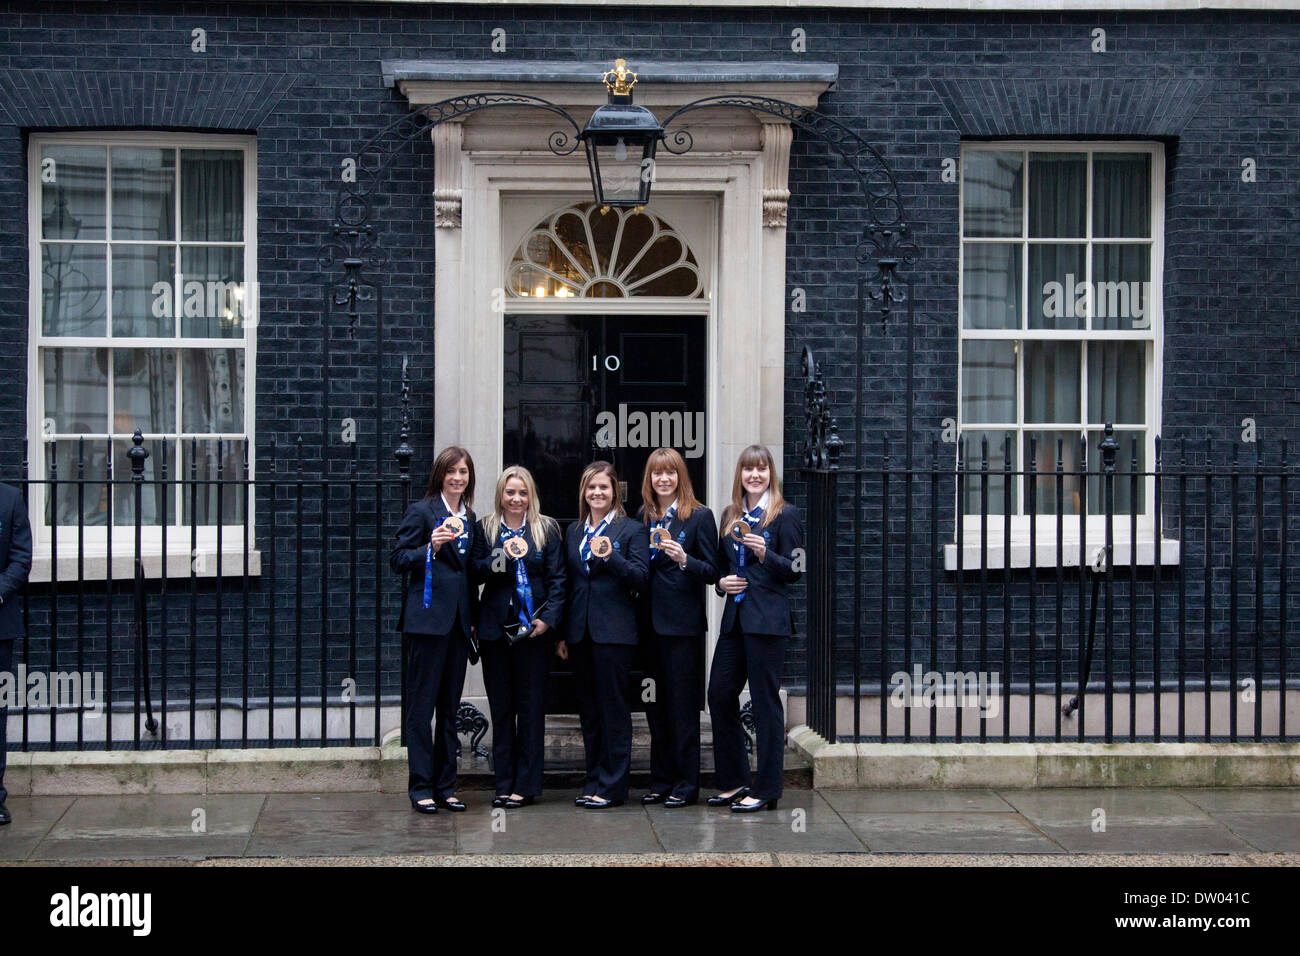 Westminster London, UK. 25th February 2014. British Women's Curling team bronze medalists, Eve Muirhead, Anna Sloan, Vicki Adams, Claire Hamilton and Lauren Gray pose with their bronze medal as British Olympic athletes and medalists from the 2014 Winter Olympic games in Sochi are honoured in a reception hosted by Prime Minister David Cameron at 10 Downing Street Credit:  amer ghazzal/Alamy Live News Stock Photo